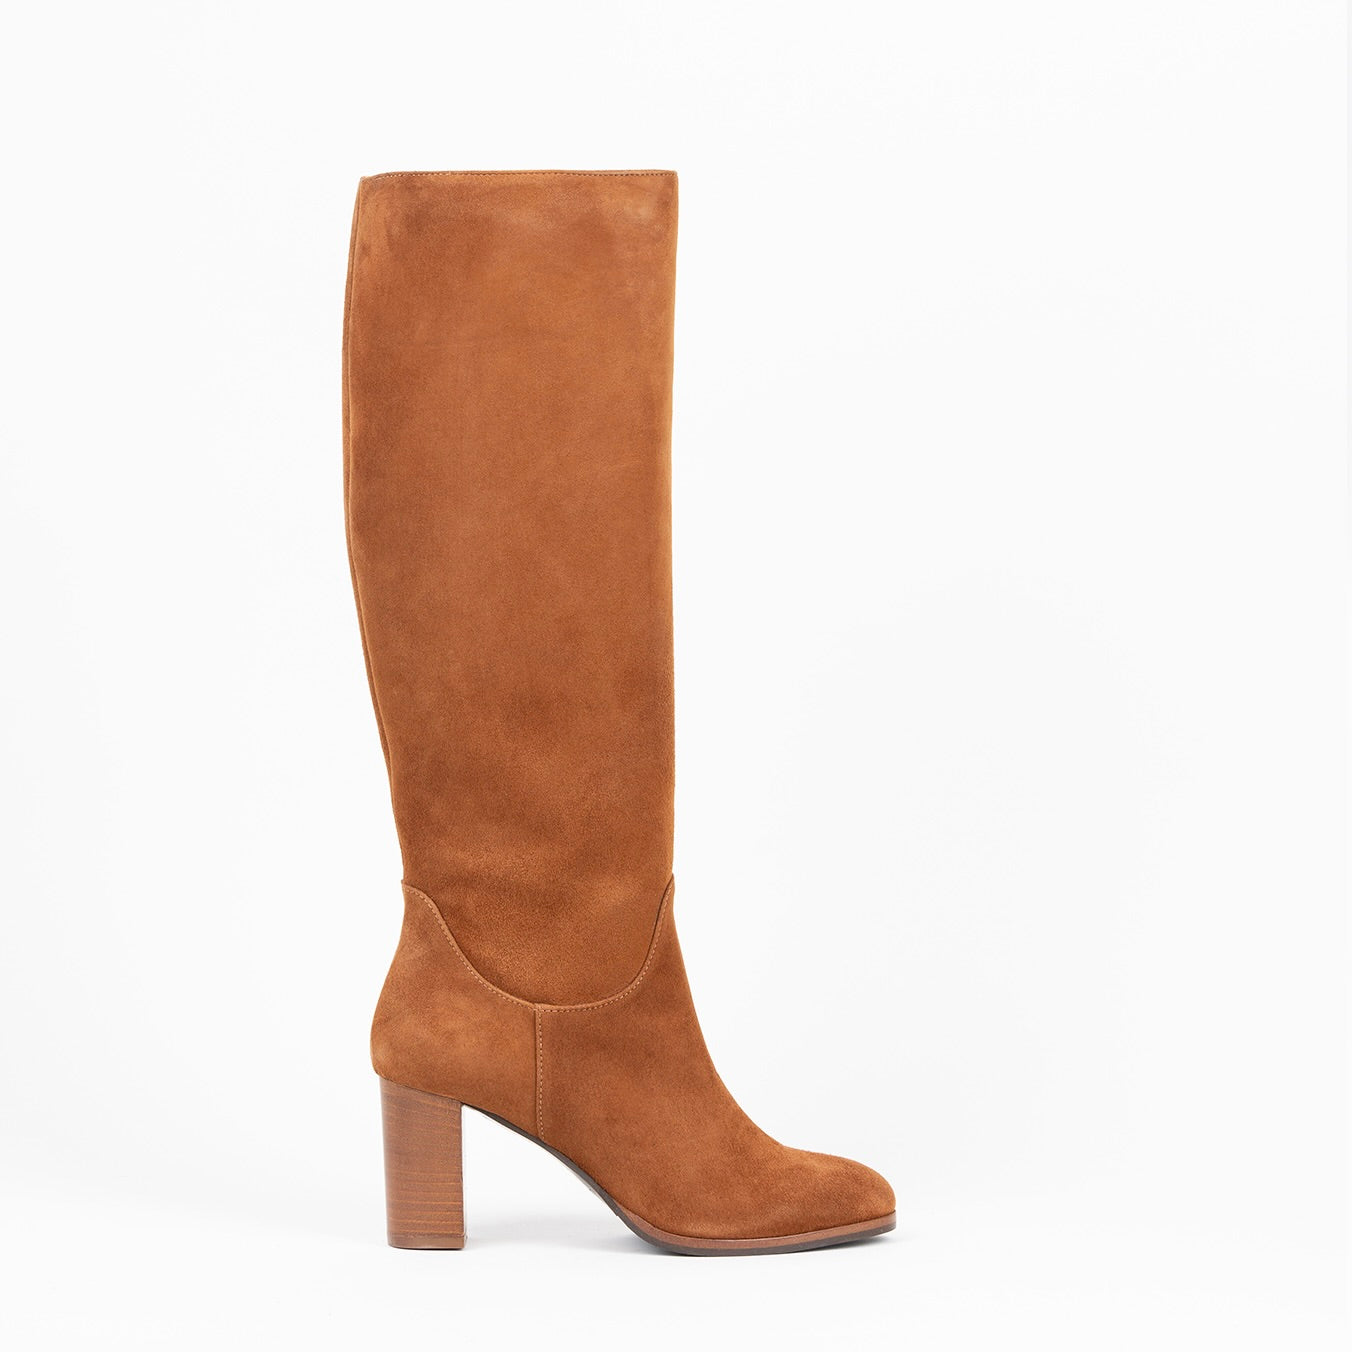 Light brown suede leather boots with block heel